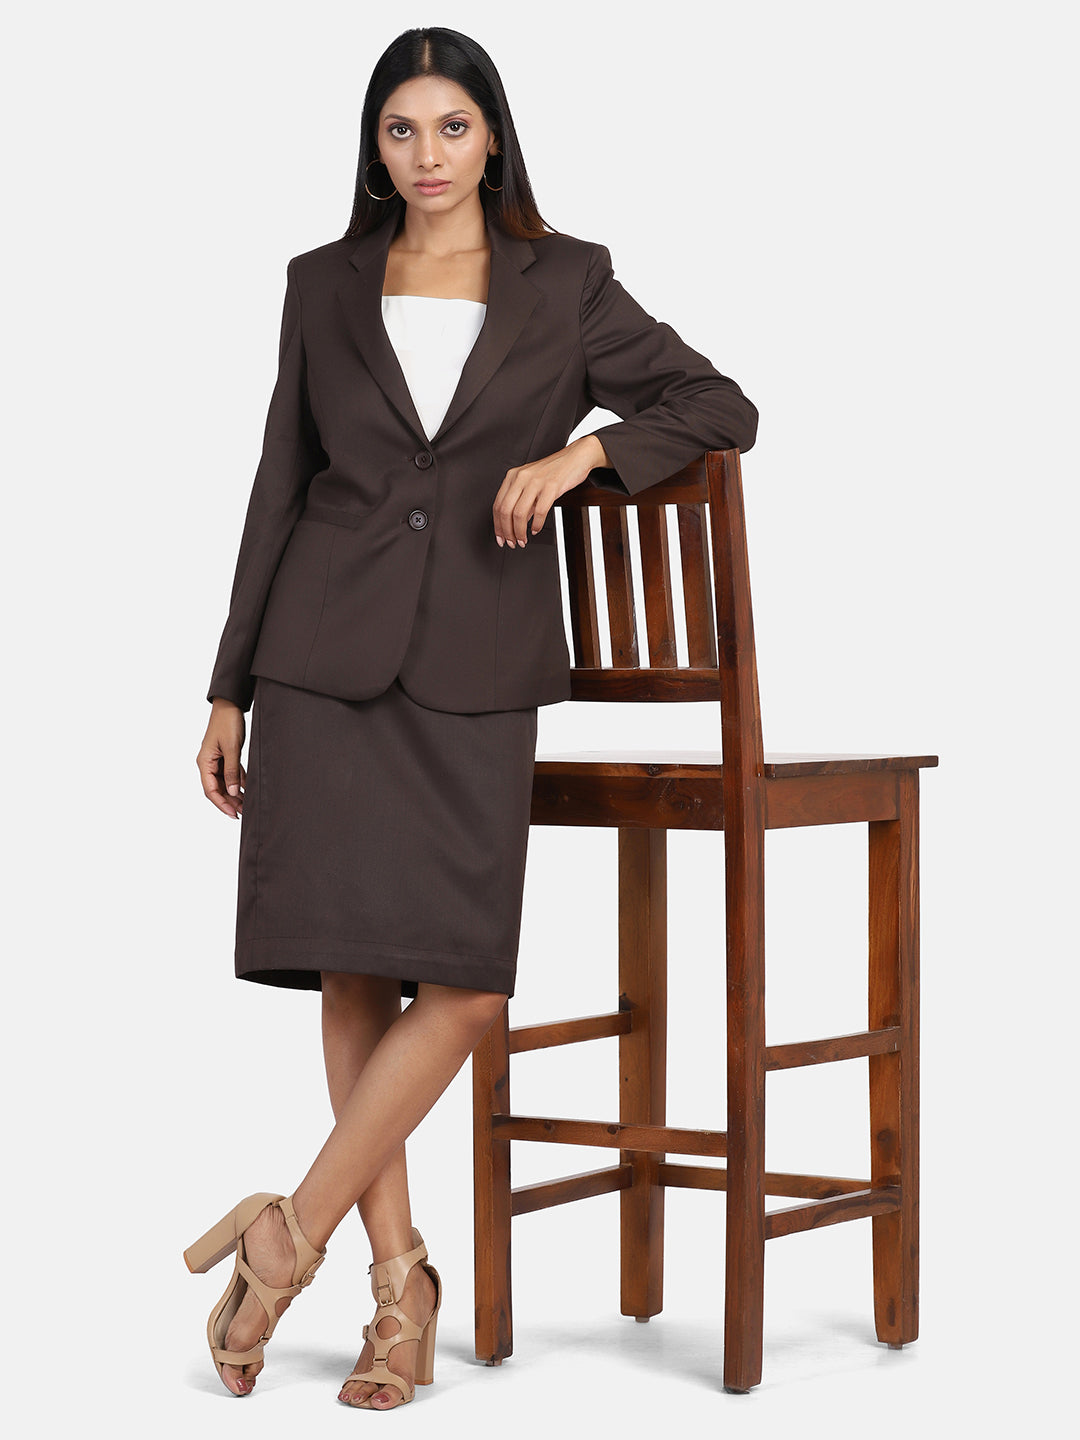 Poly Cotton Skirt Suit - Chocolate Brown